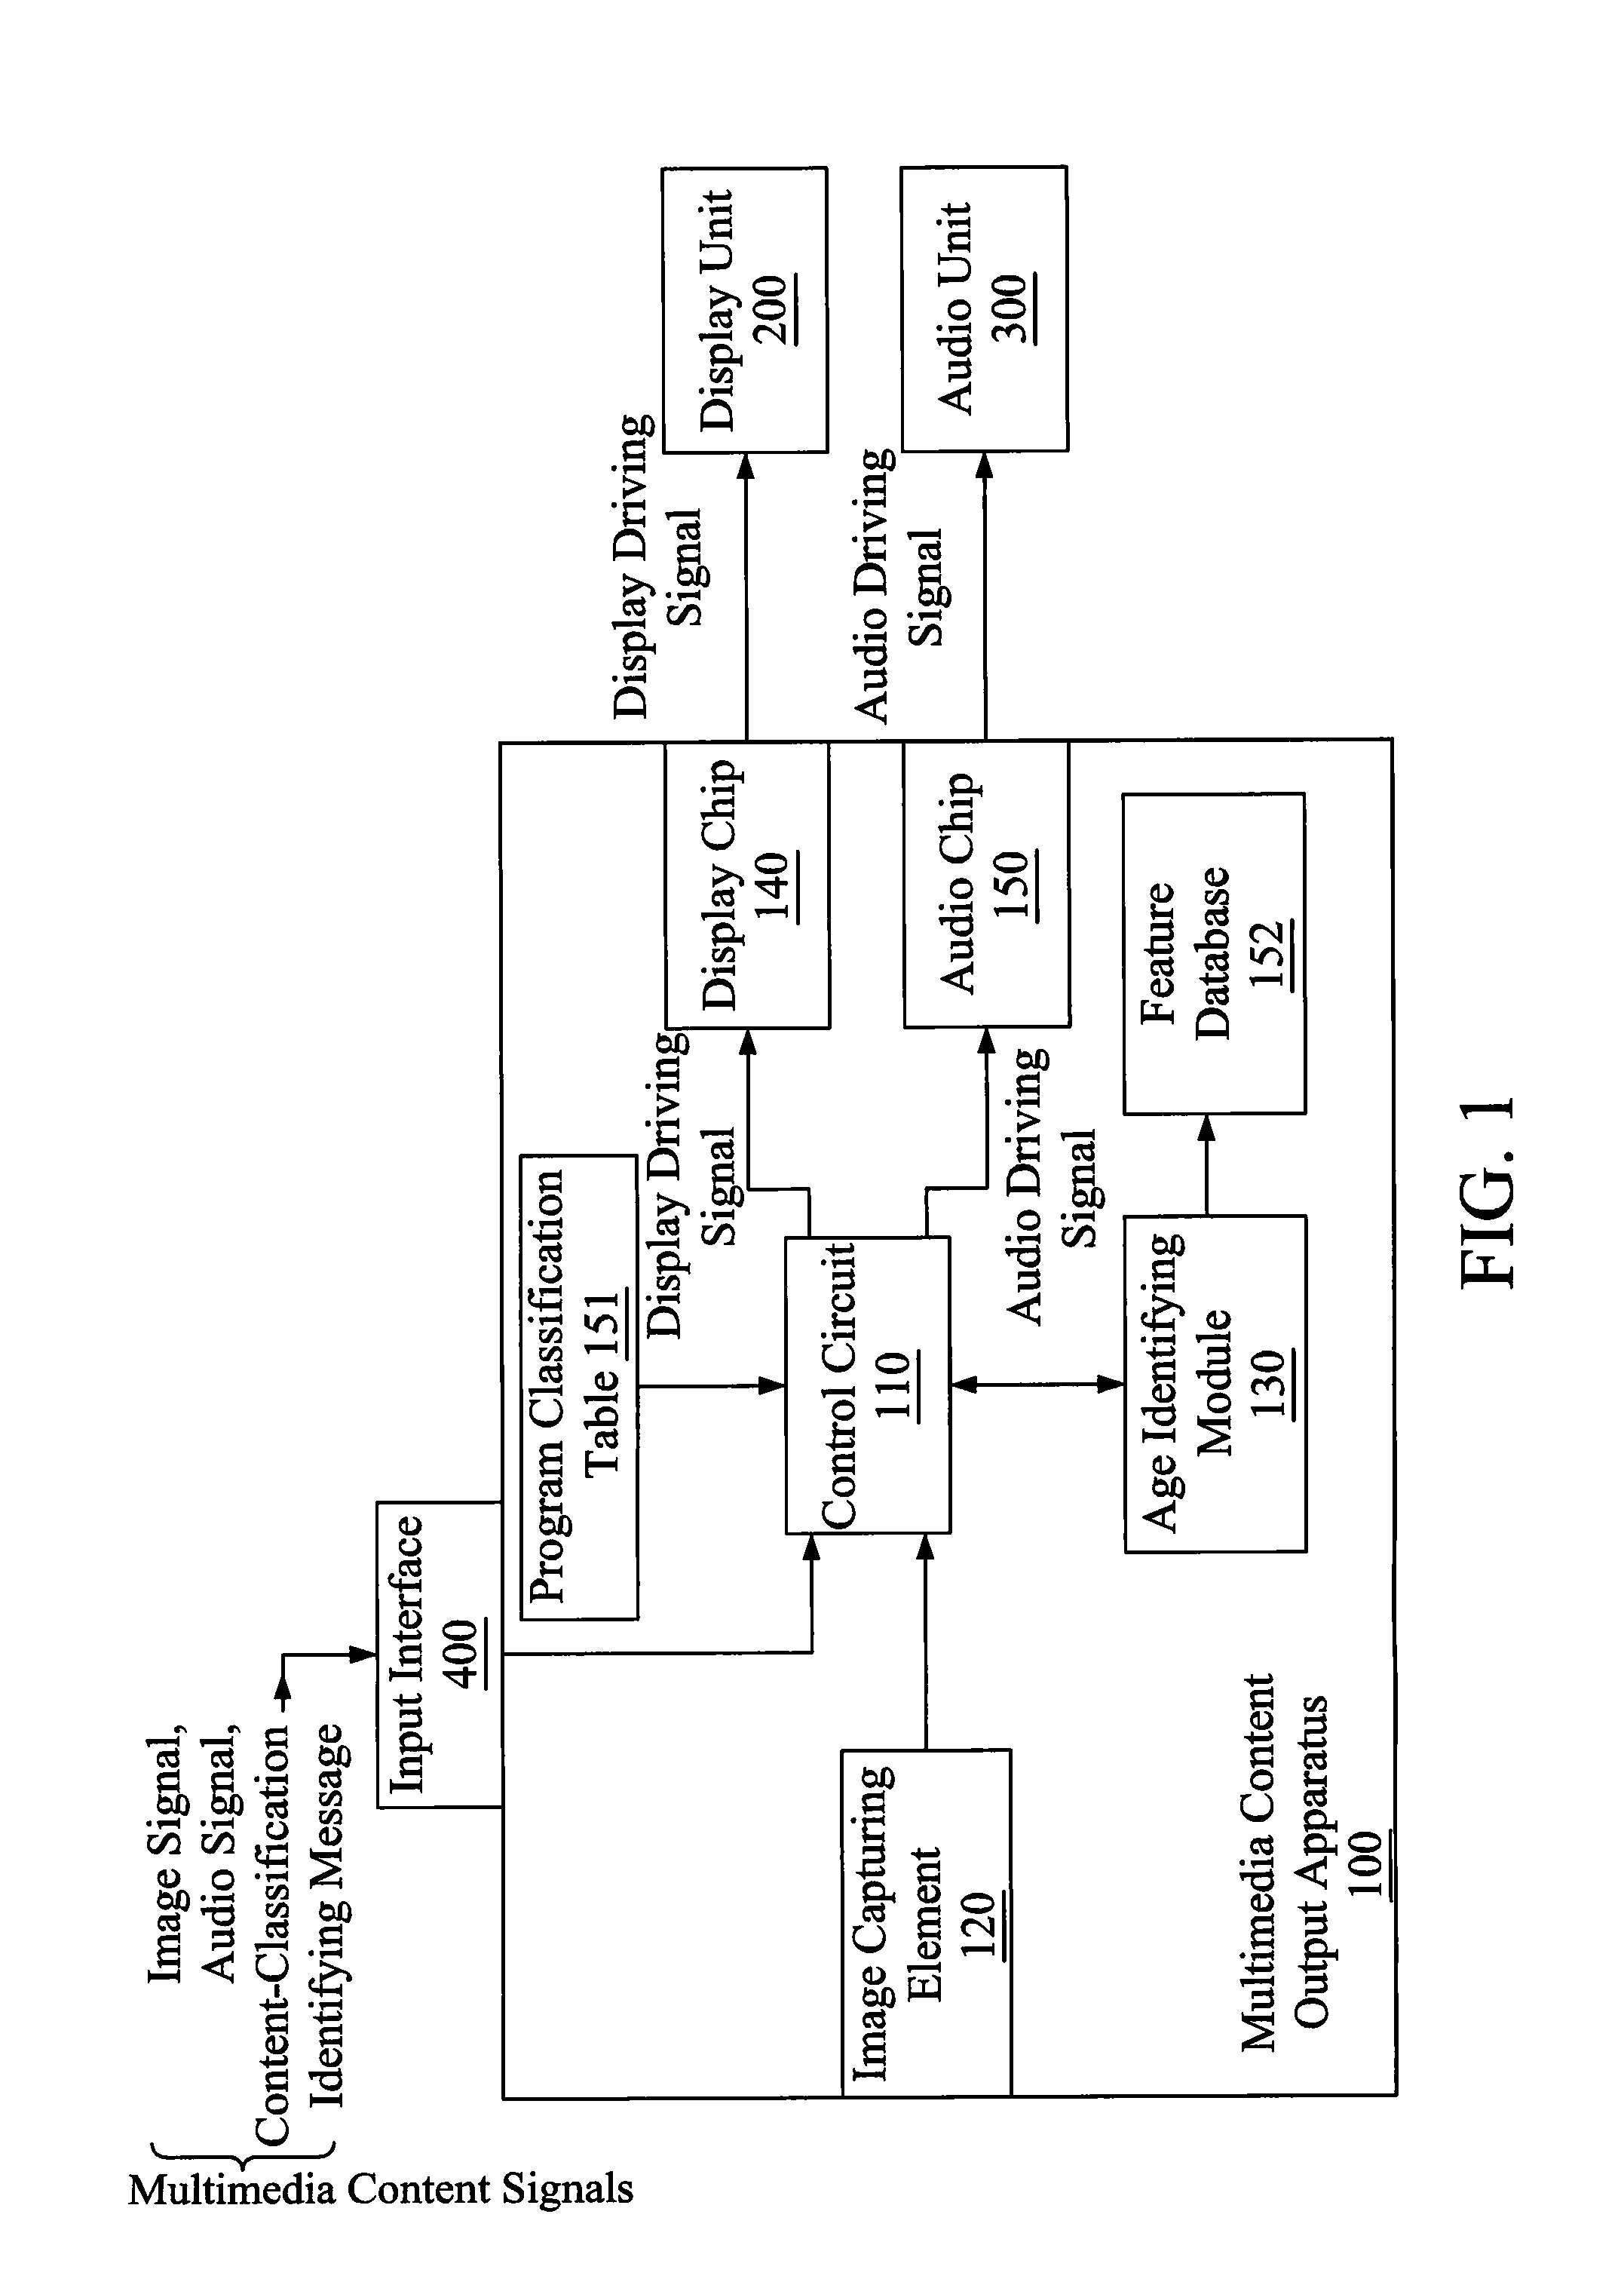 Multimedia content output device and method for filtrating multimedia content signals according to audience age